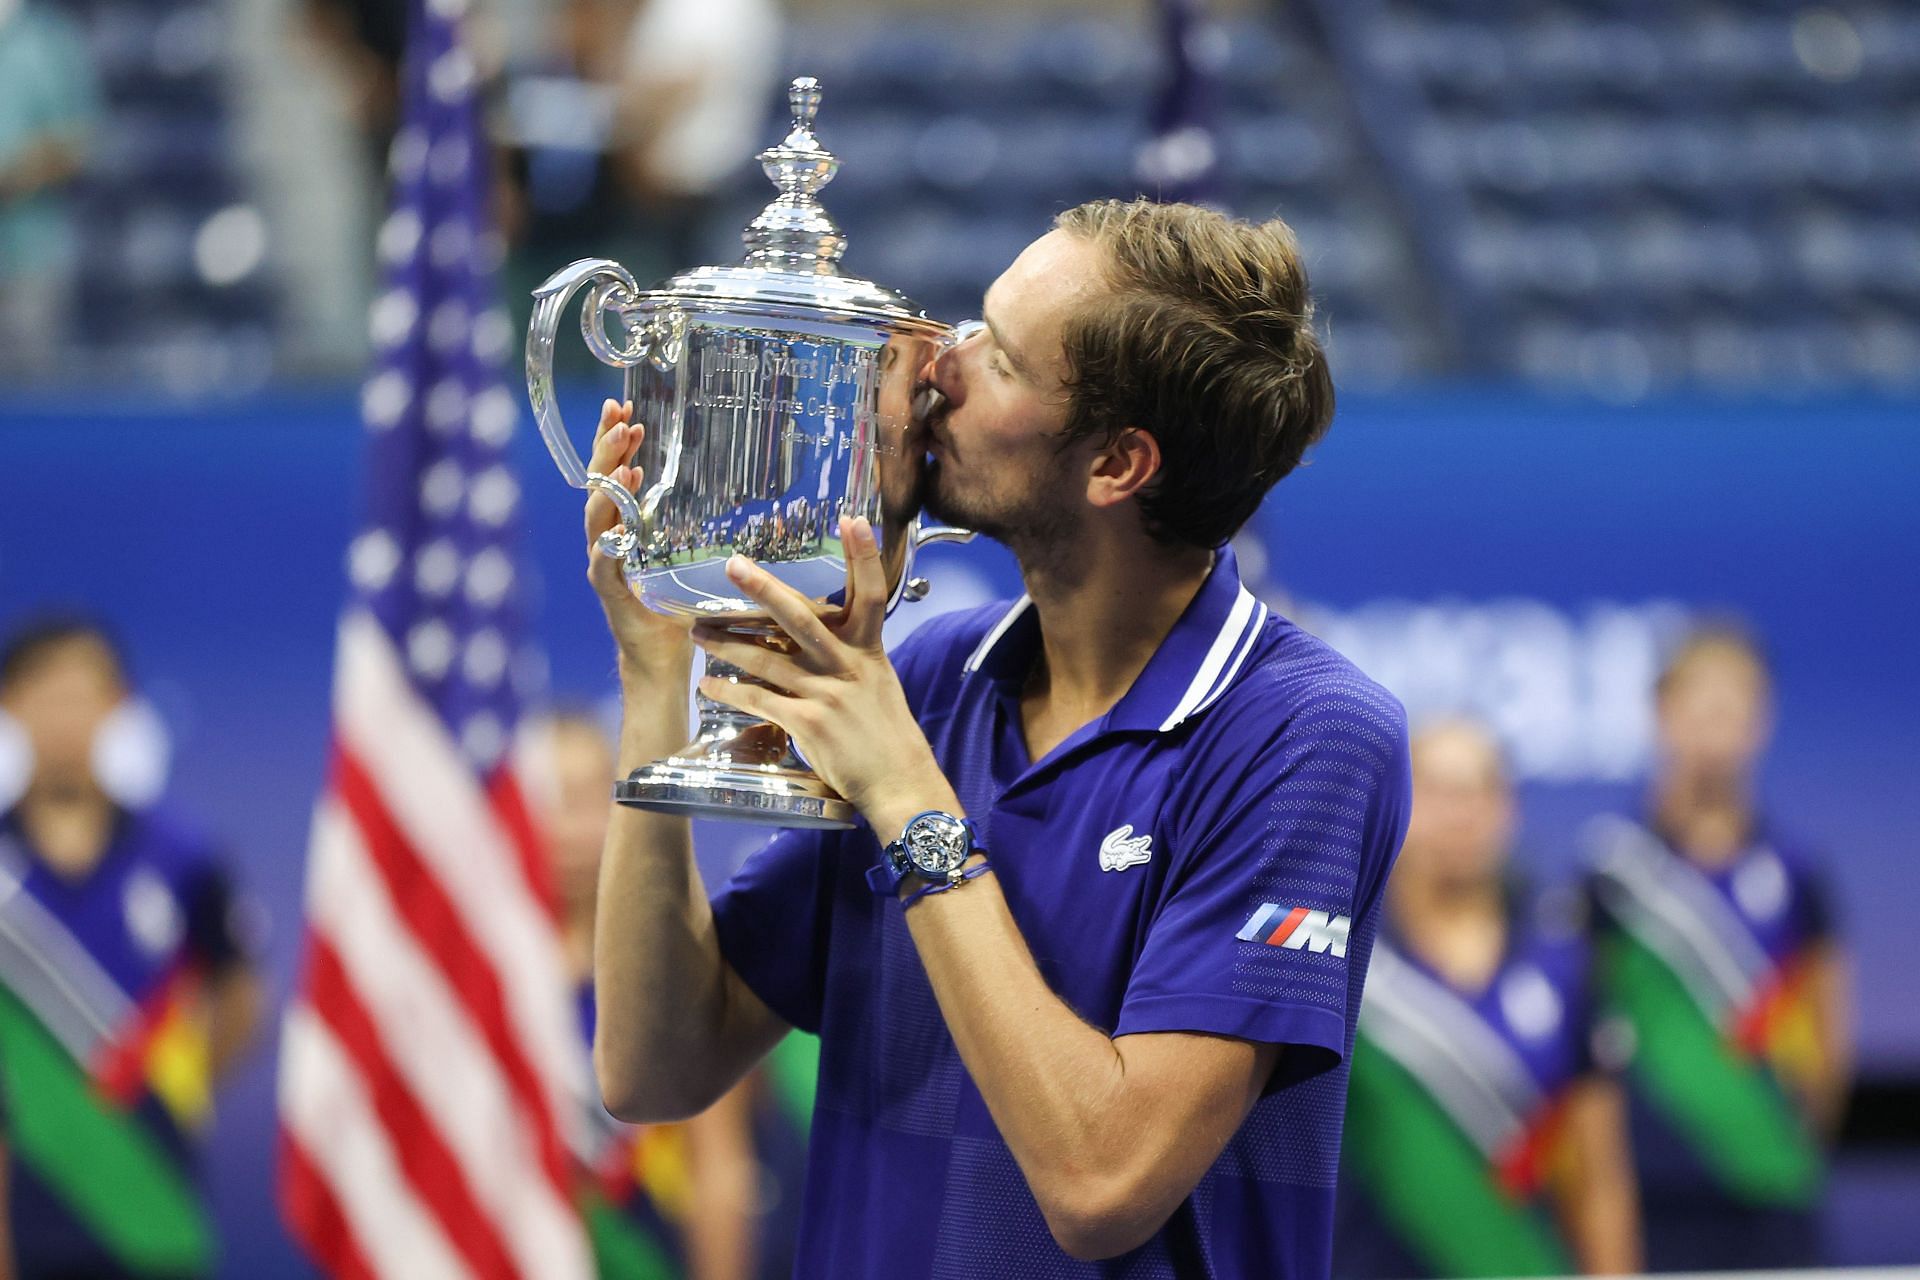 2021 US Open - Day 14